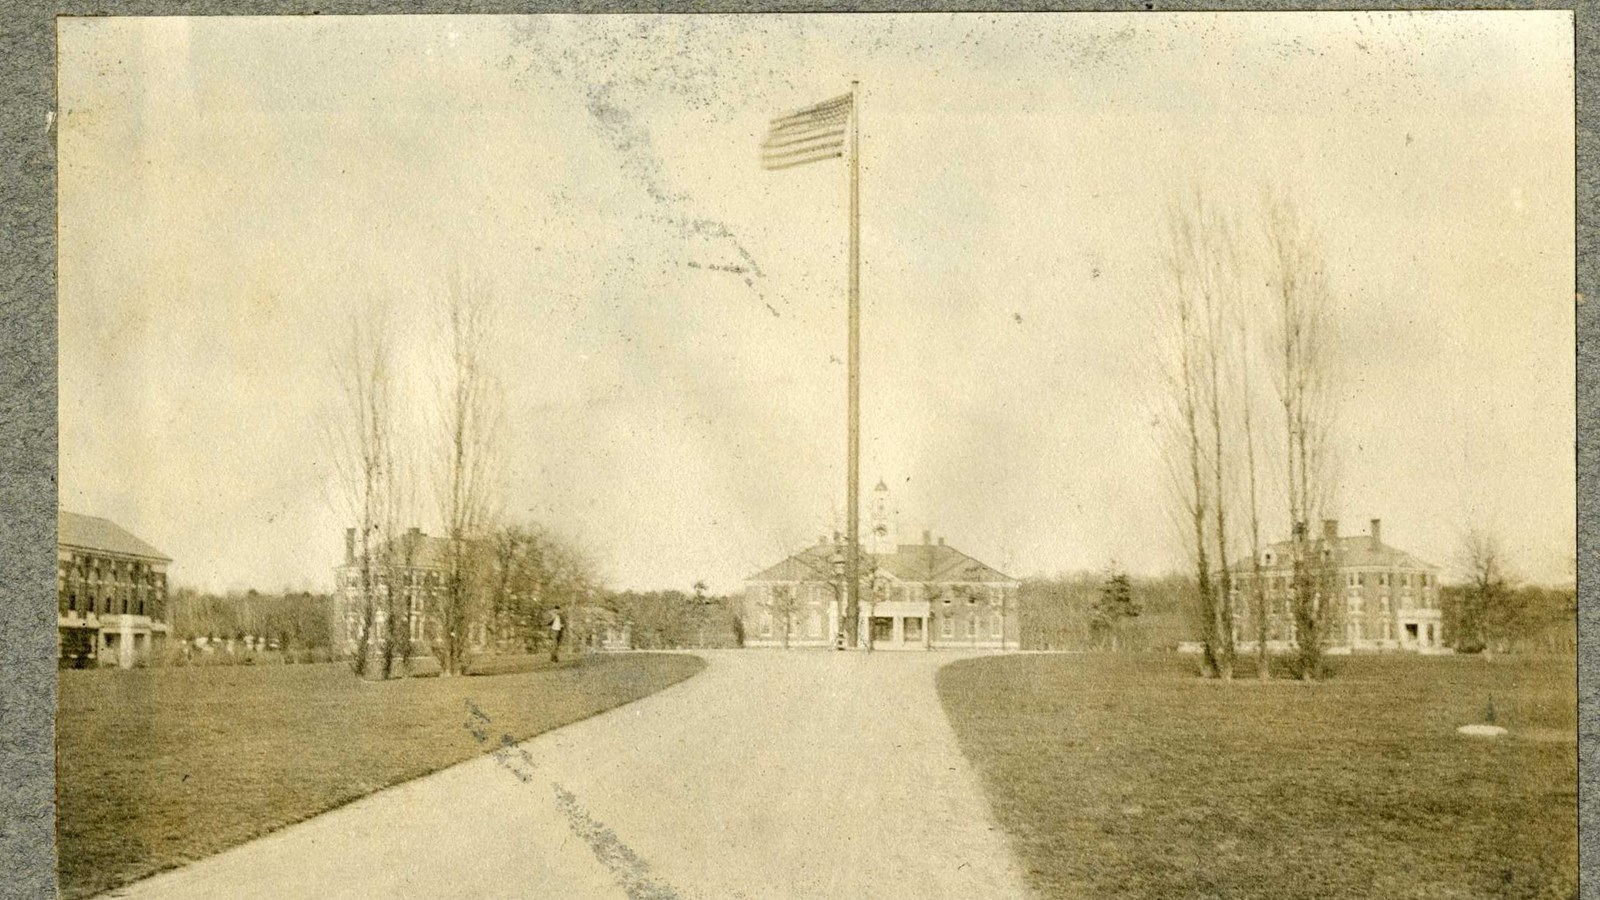 Black and white of road leading to group of buildings with flag pole in middle, trees on edge